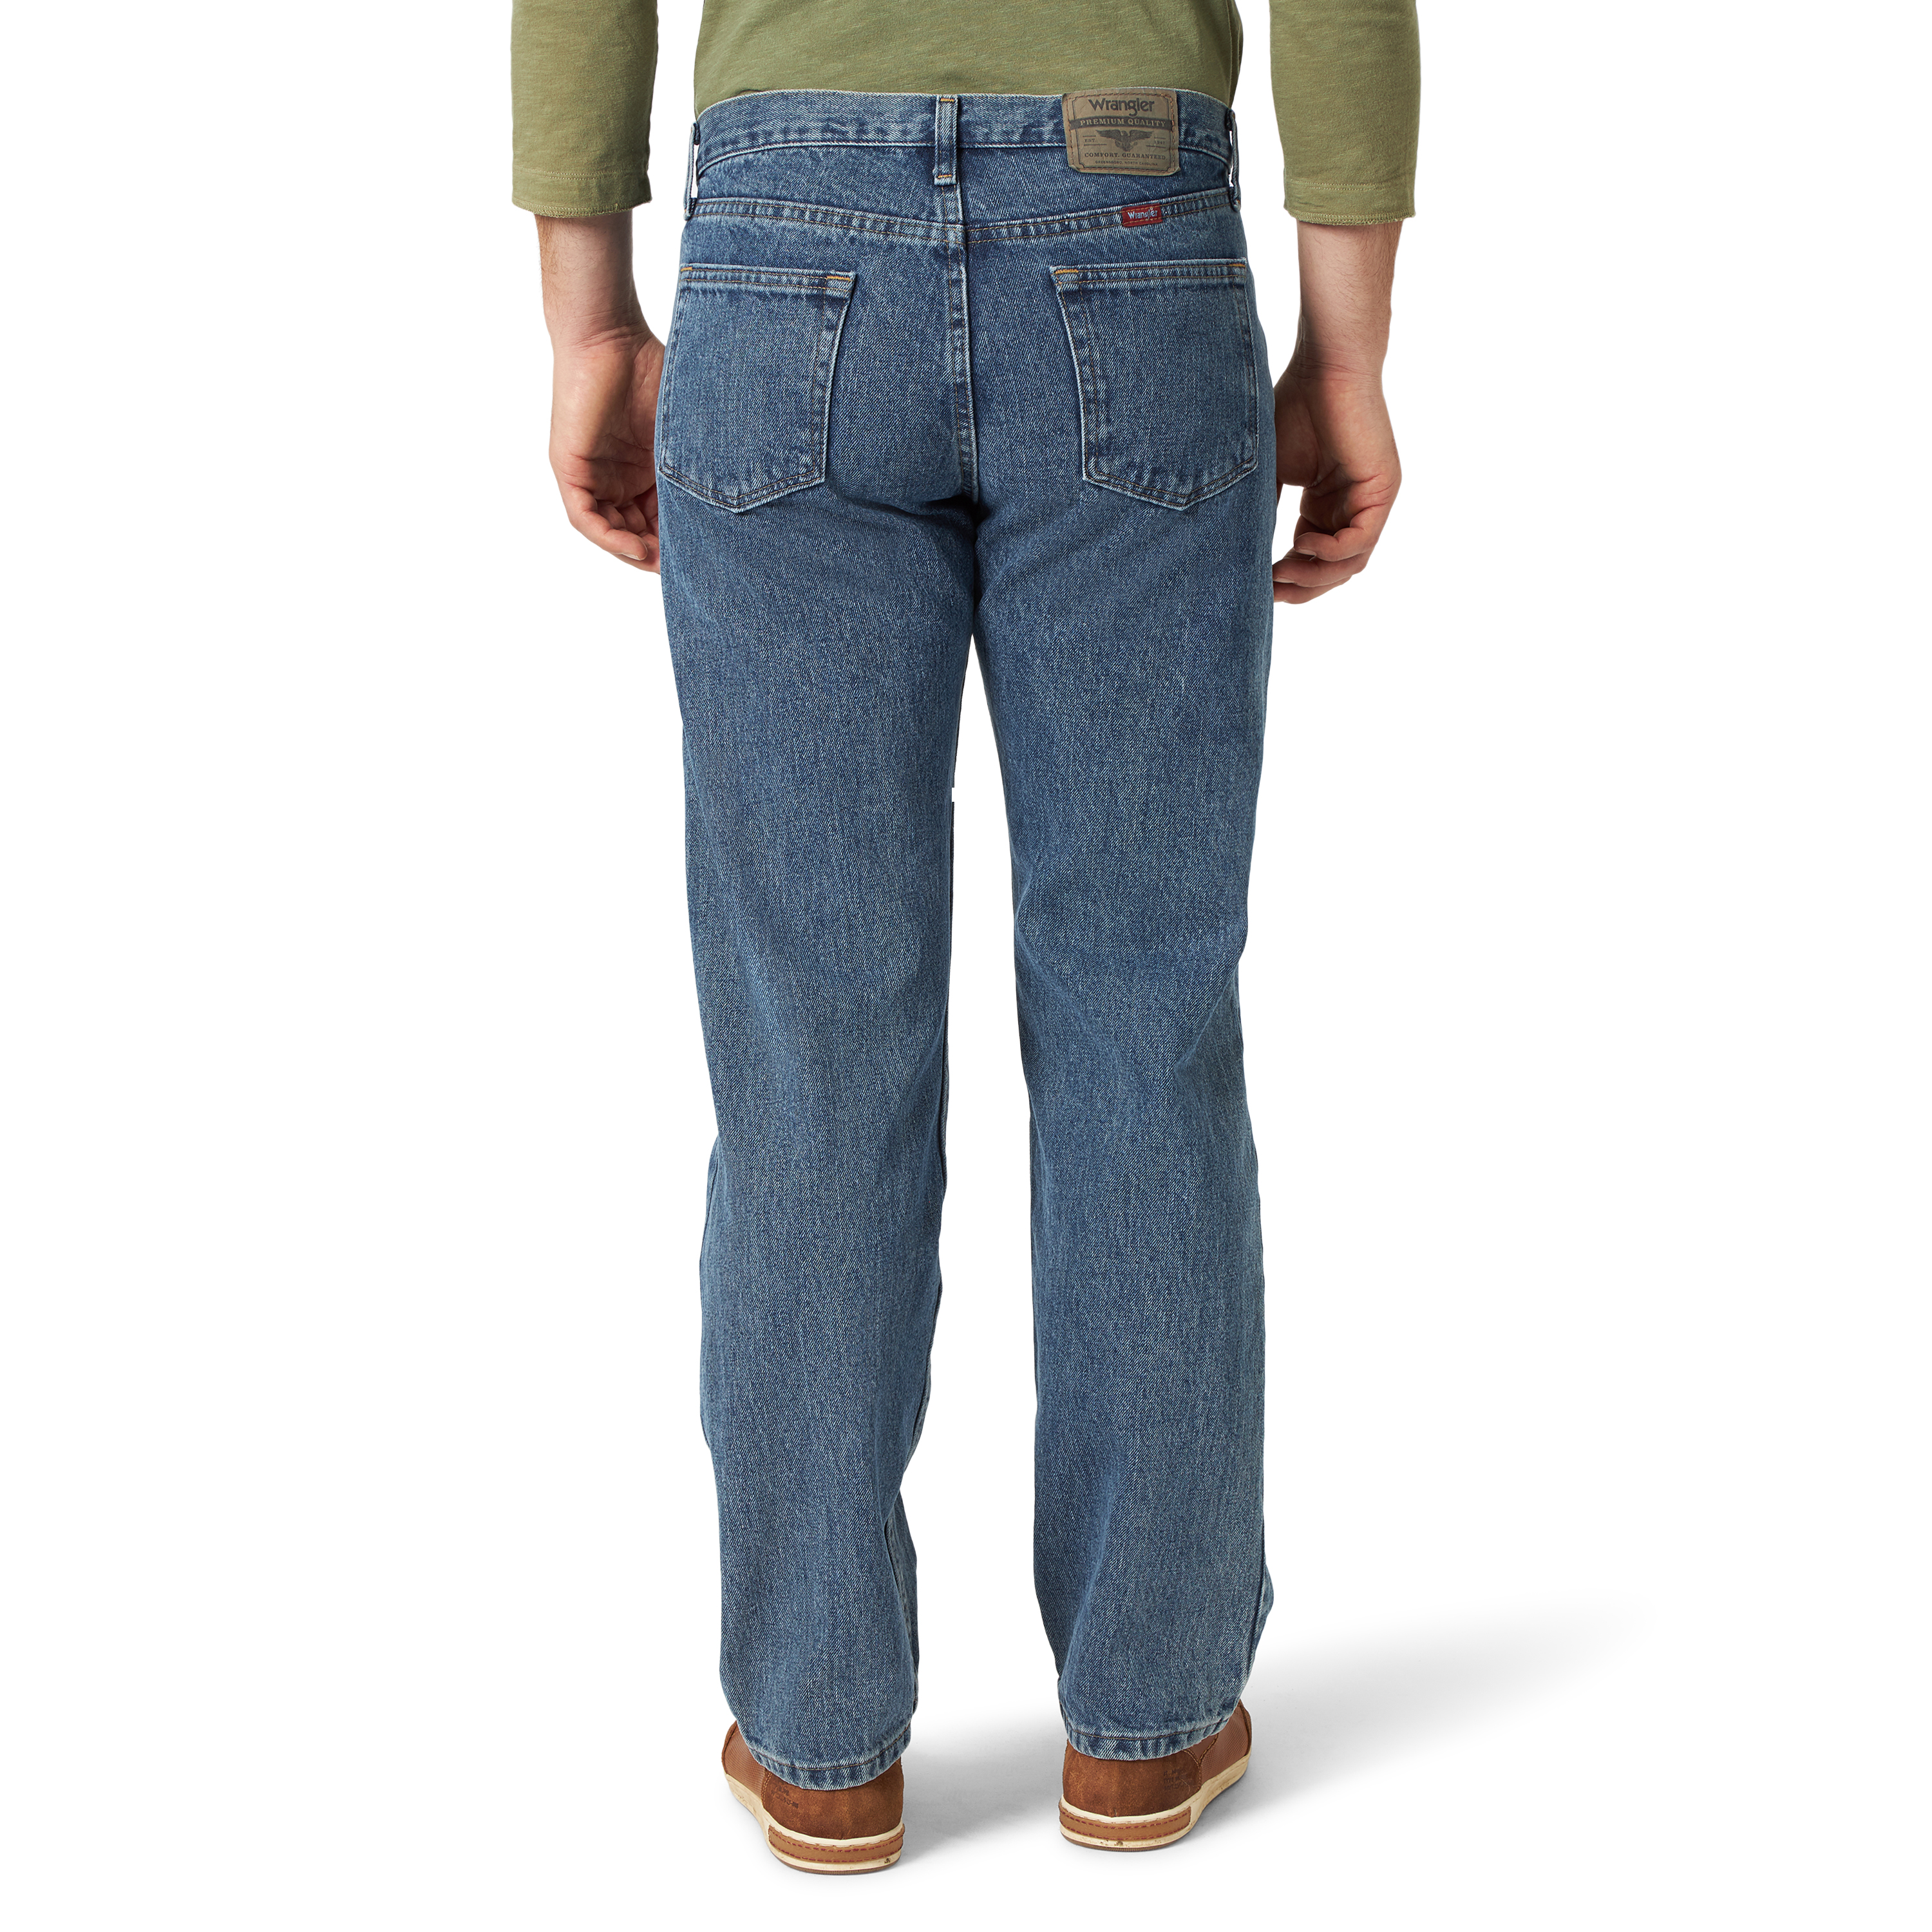 Wrangler Men's and Big Men's Relaxed Fit Jeans - image 3 of 5